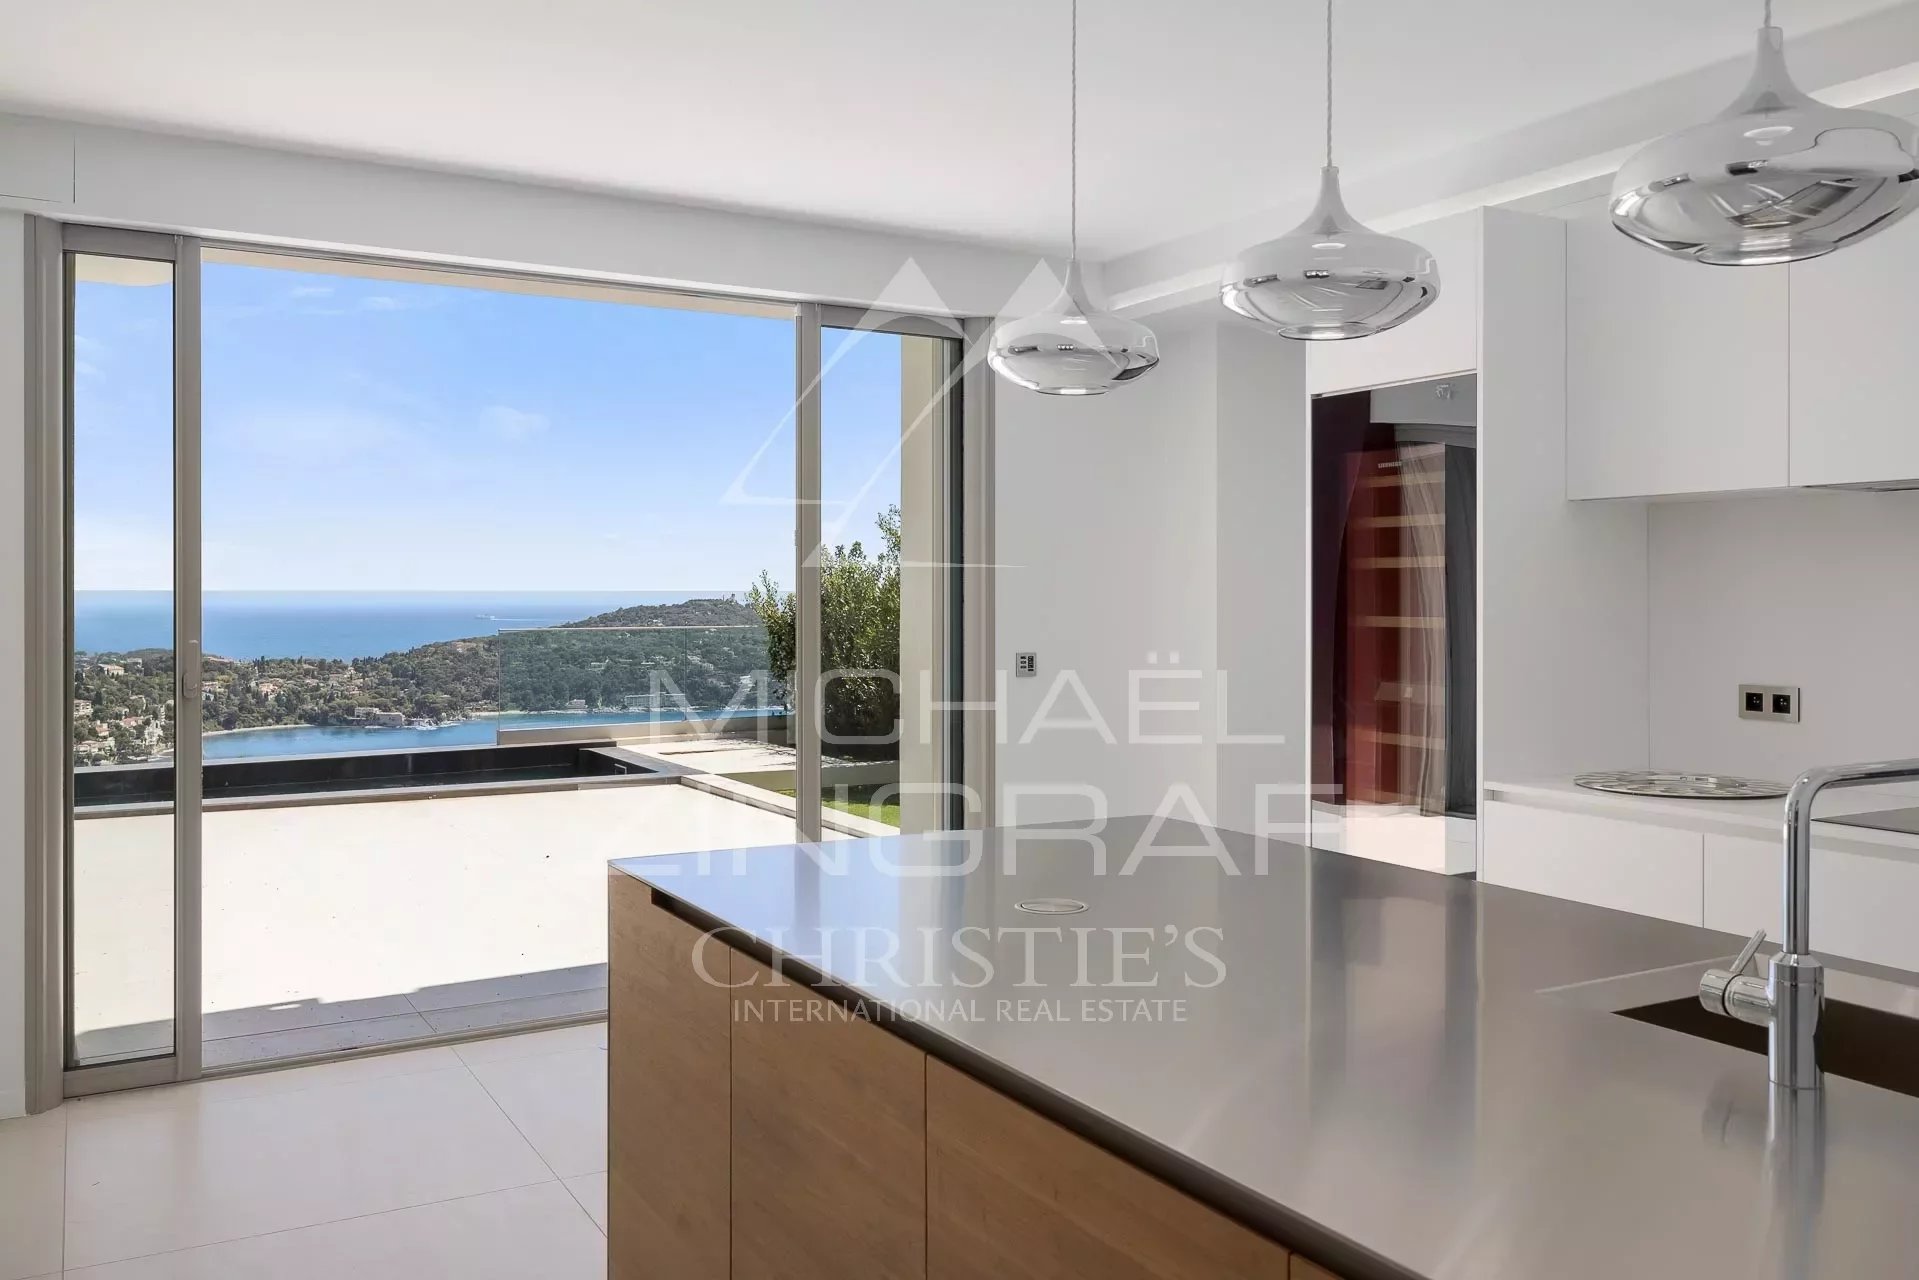 Villefranche sur mer - Luxury contemporary villa with overlooking view over the bay